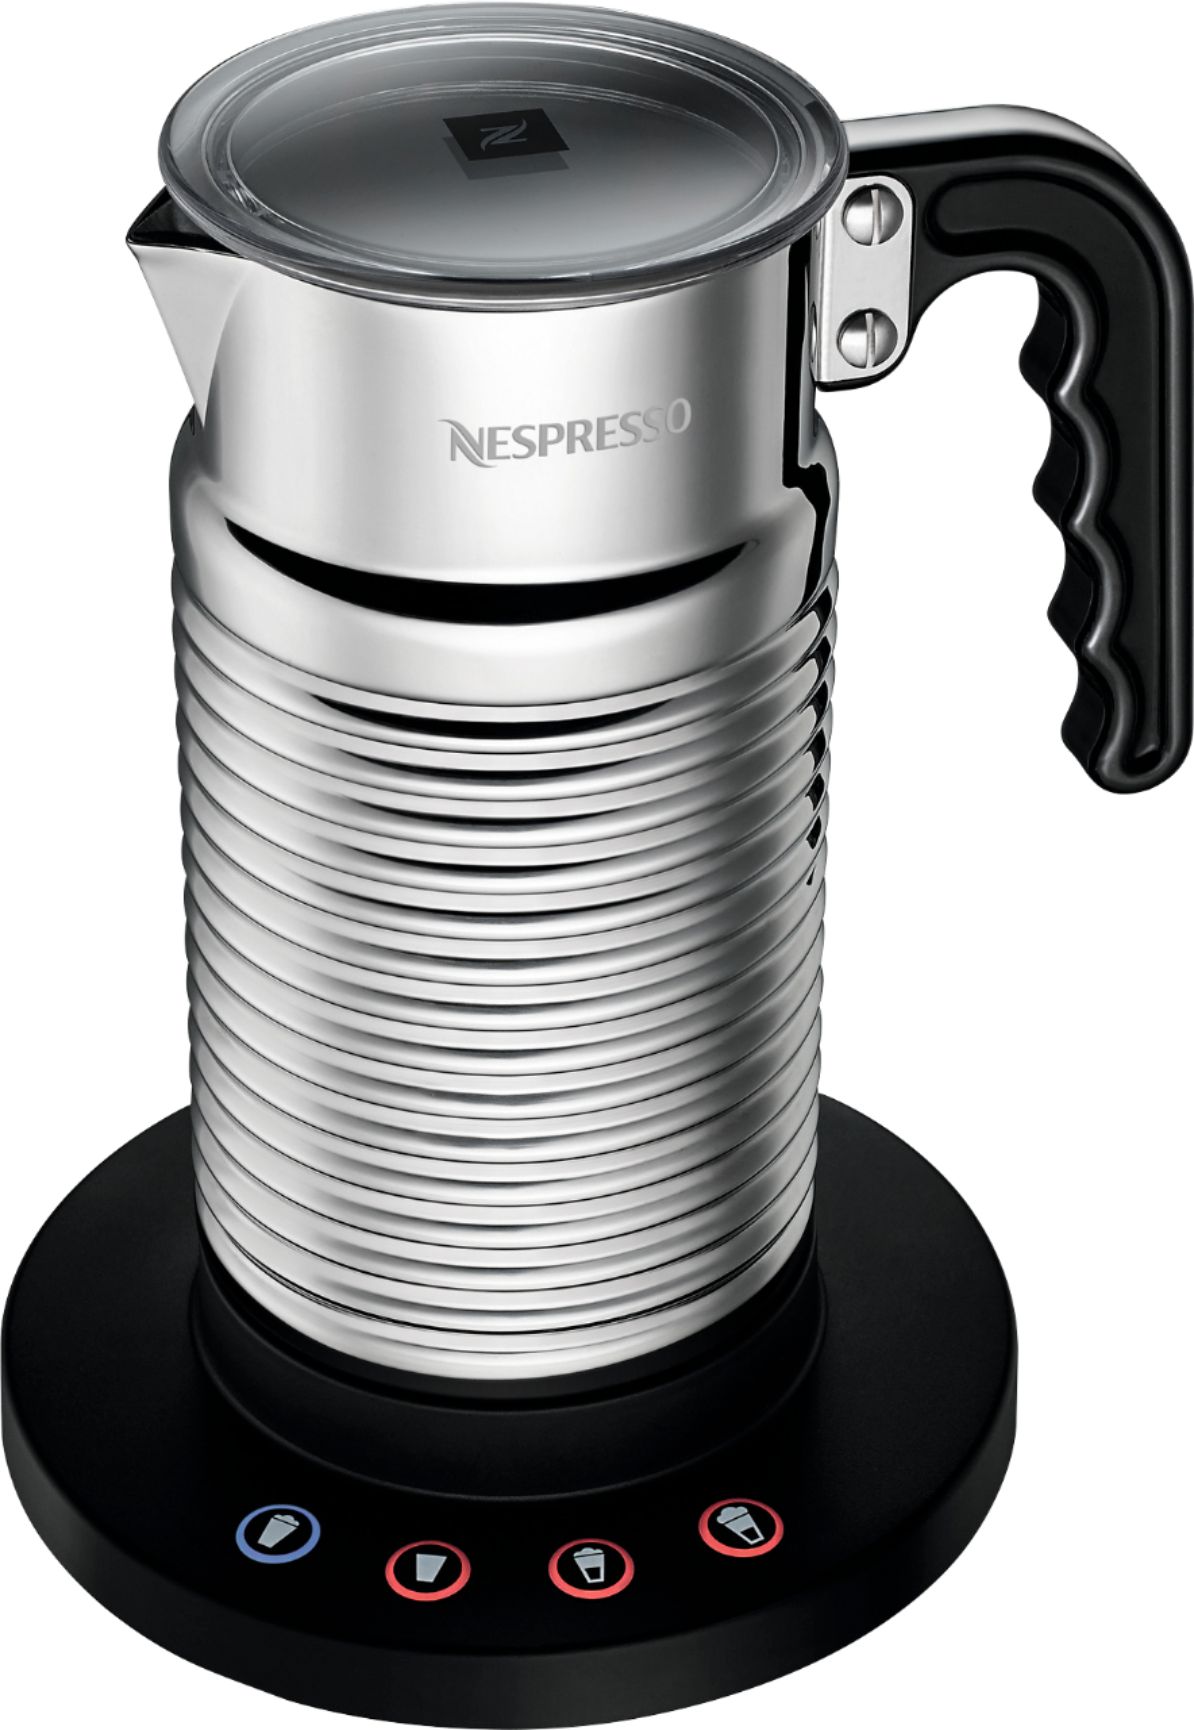 Nespresso 3192-US Aeroccino Plus Milk Frother Heating Chrome for sale online